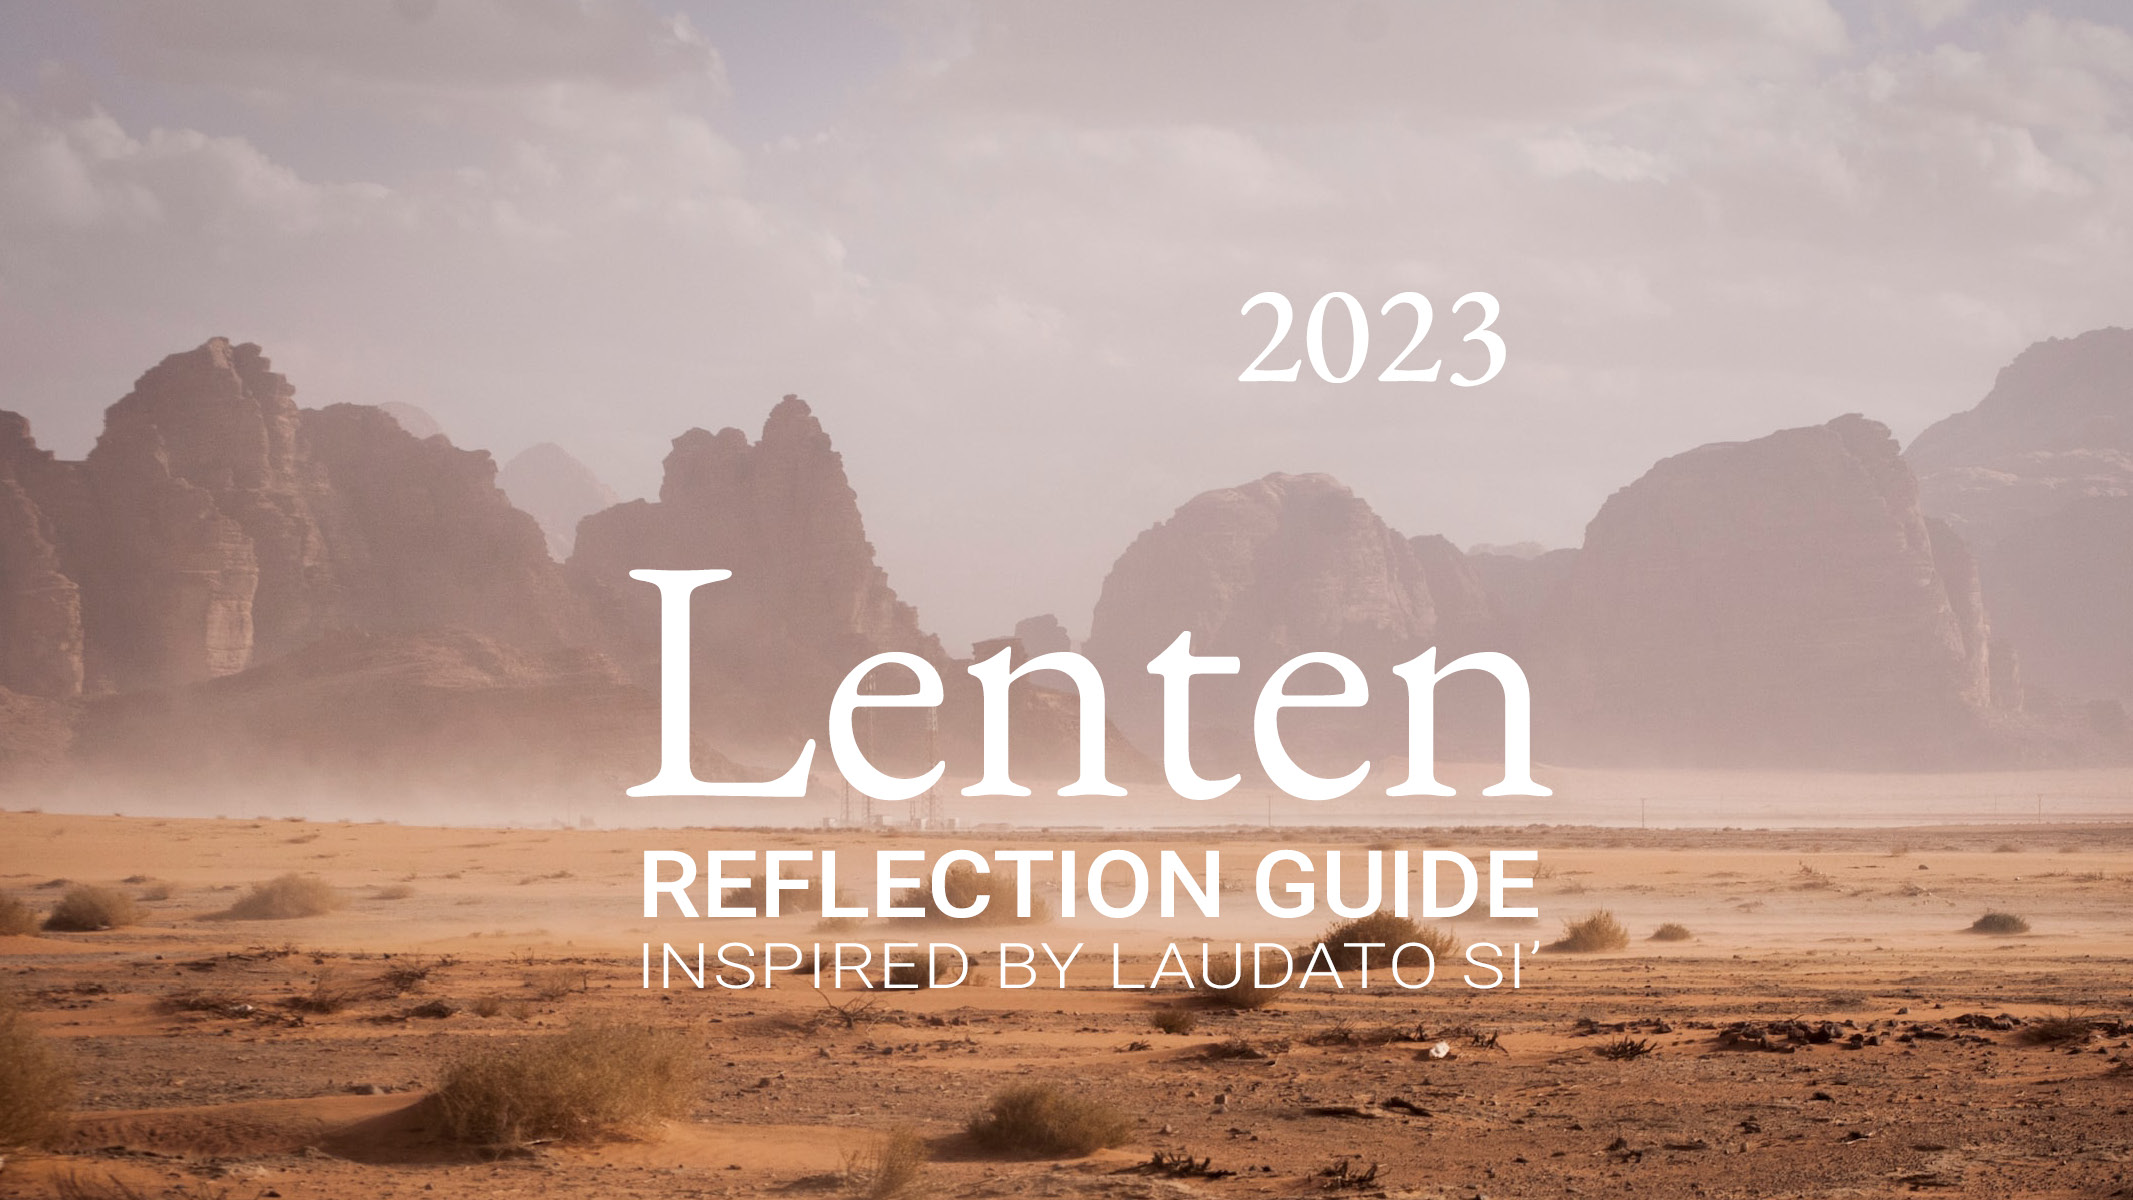 Lenten Reflection Guide 2023 Inspired By Laudato Si Maryknoll Office For Global Concerns 